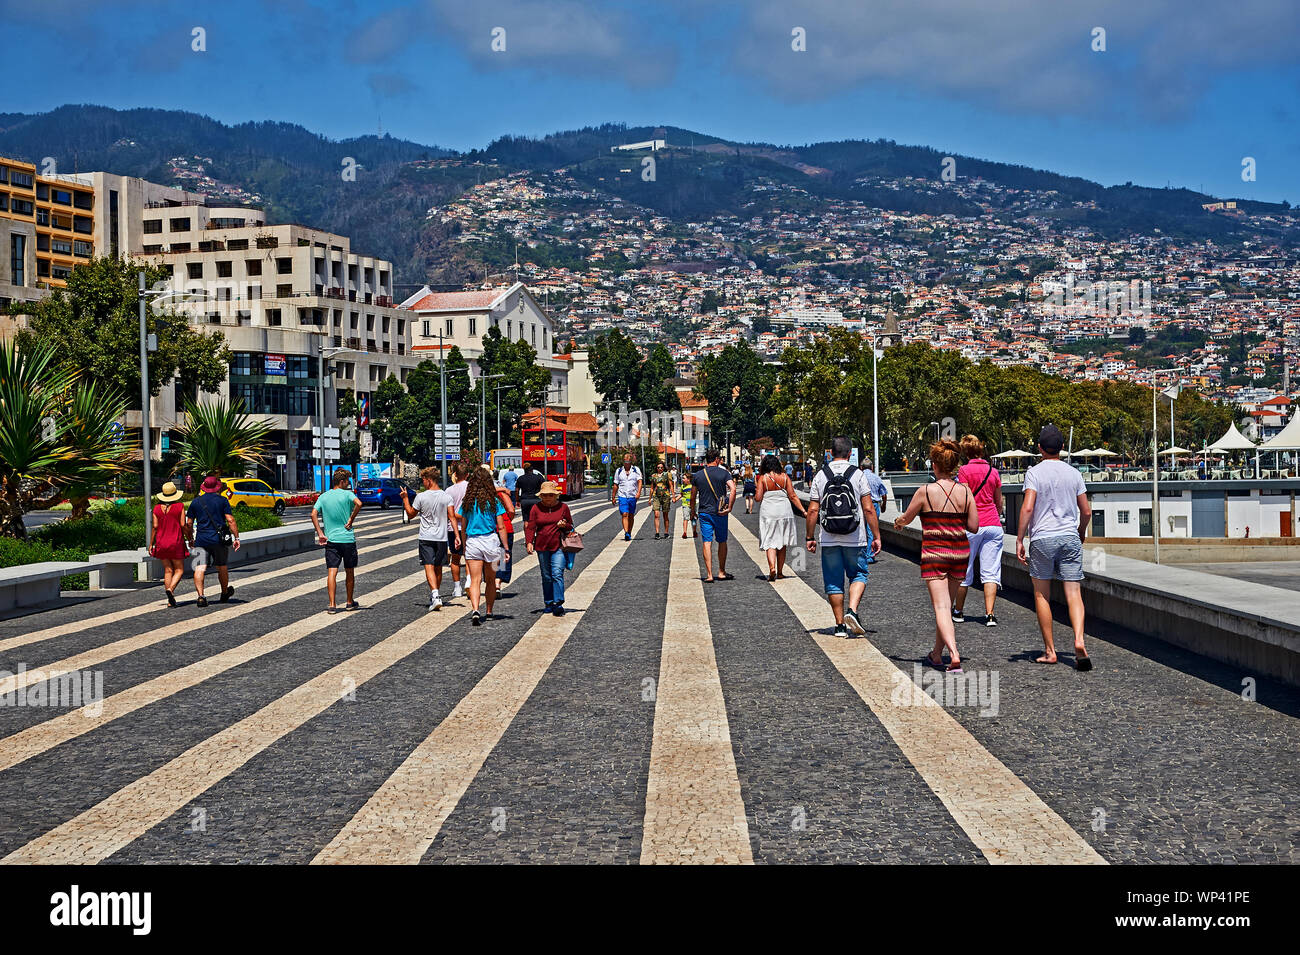 Funchal, Madeira tourists and locals walking along the pedestrianised quayside. The pattern in the footway creates converging lines. Stock Photo